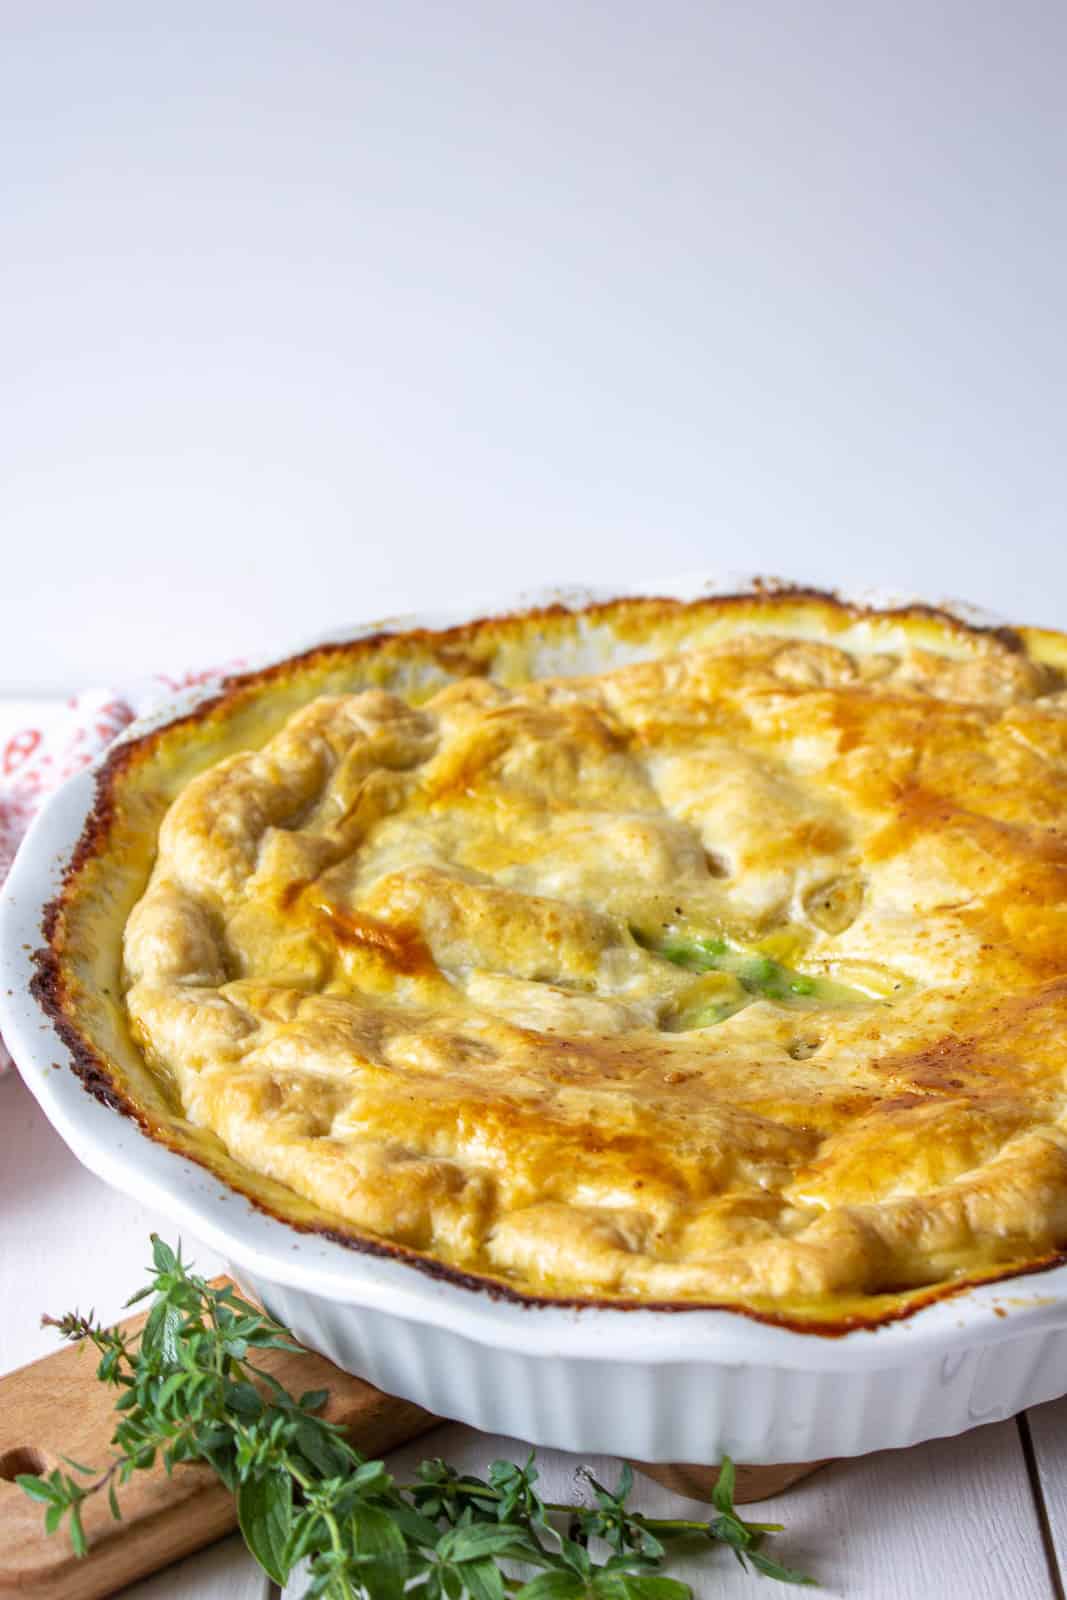 A white pie dish filled with a savory filling and topped with a puff pastry crust.